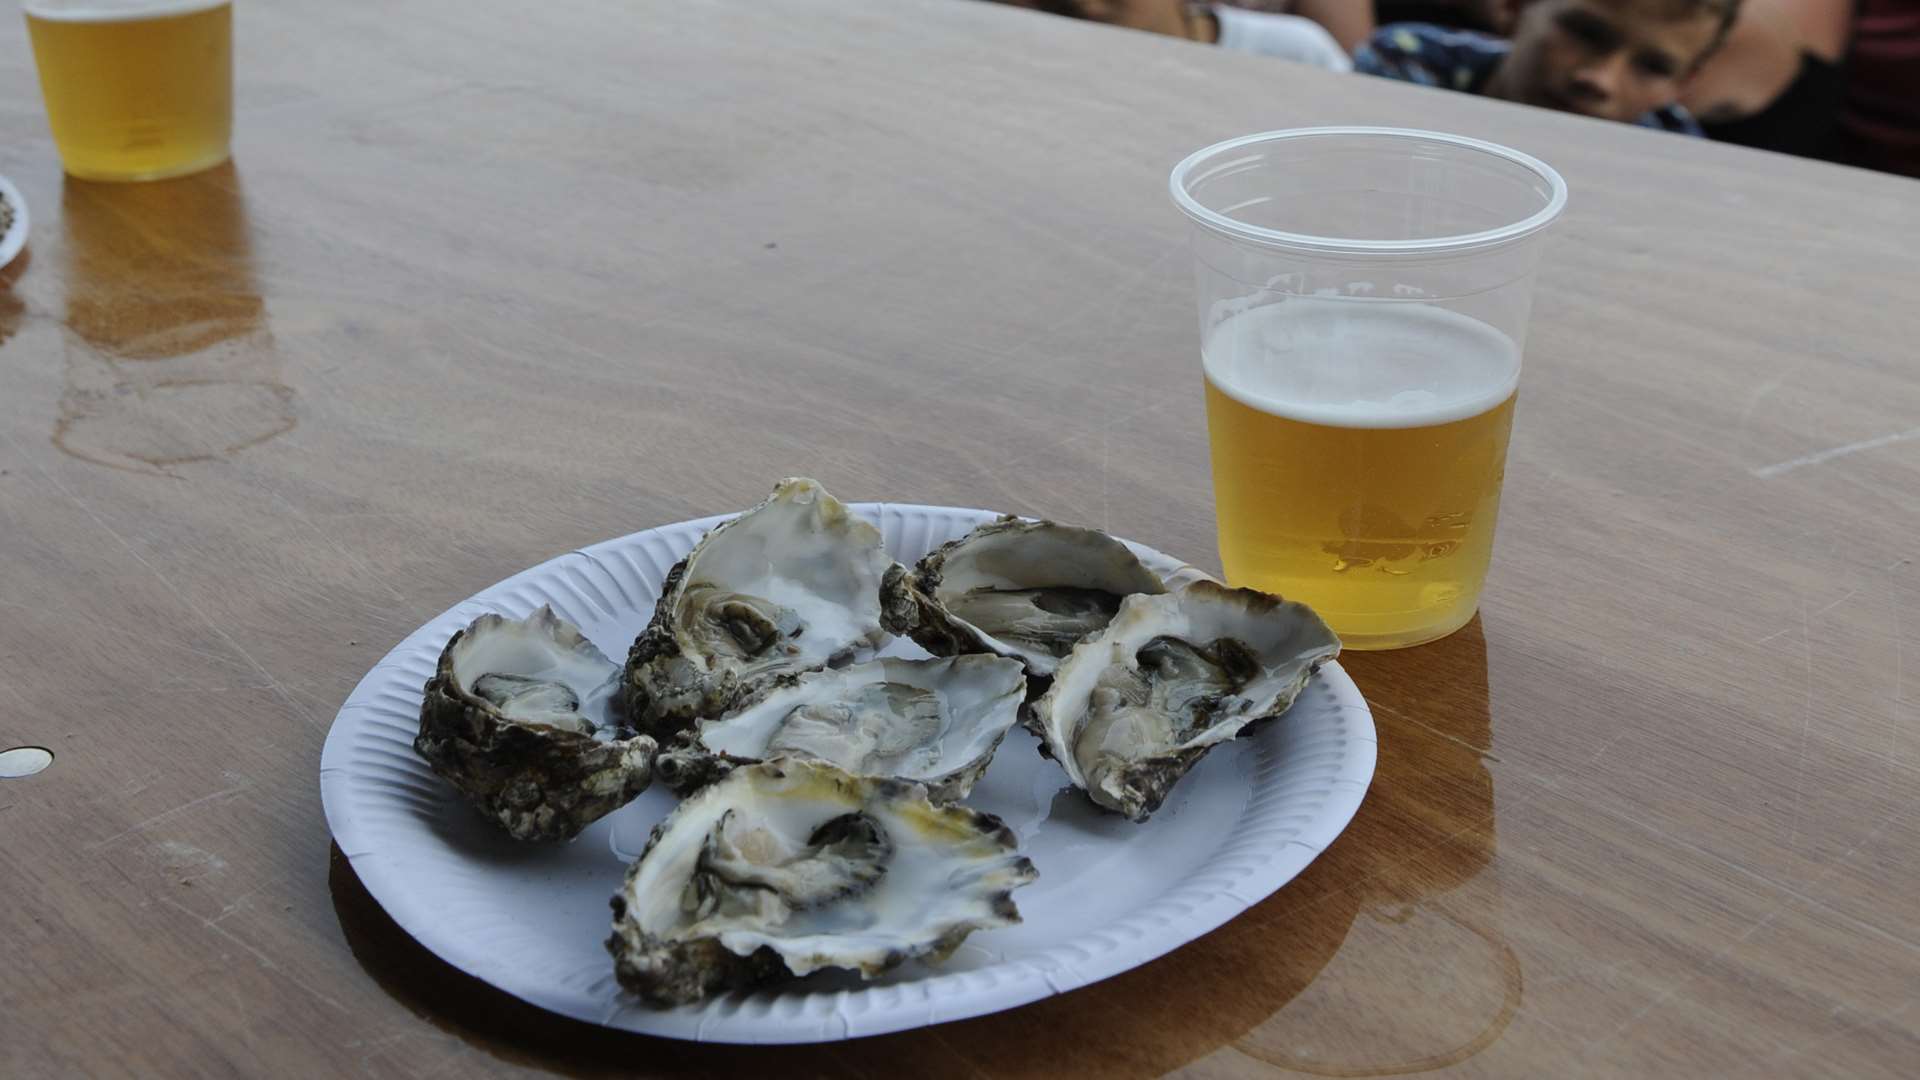 The oyster eating challenge at Whitstable